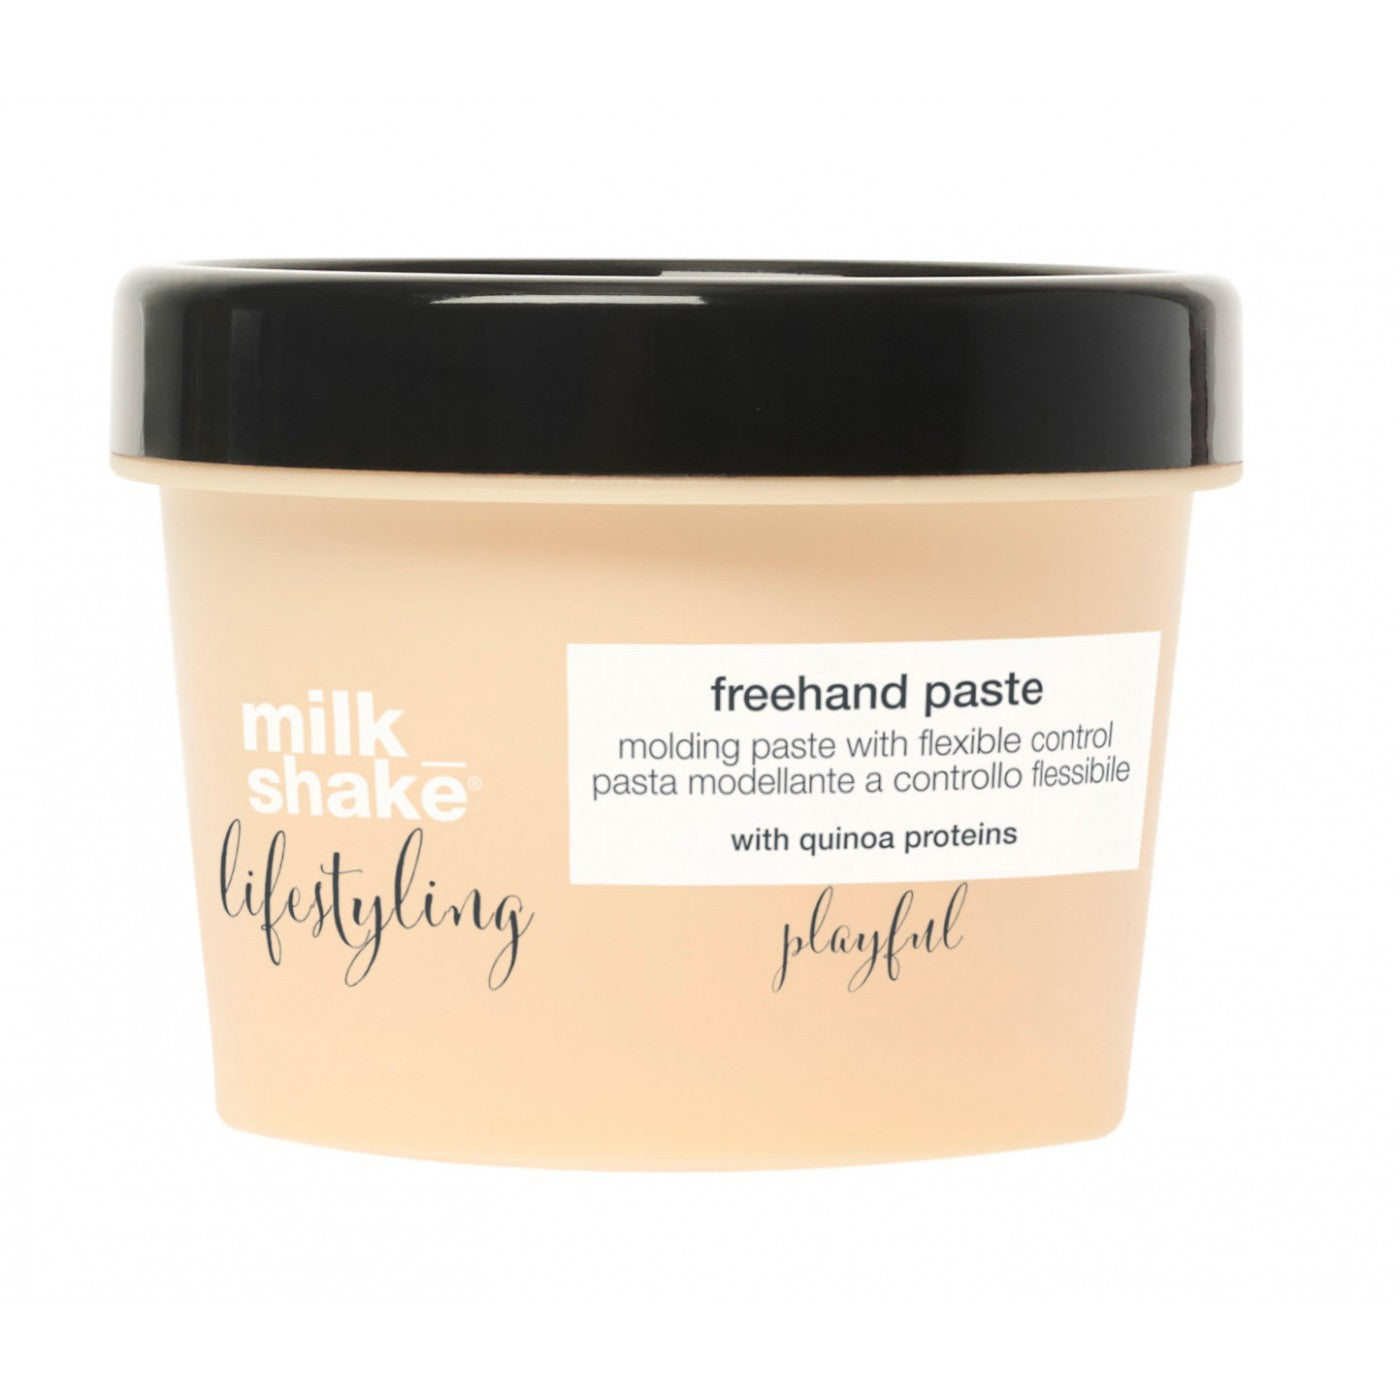 Lifestyling Freehand Paste 100 Ml